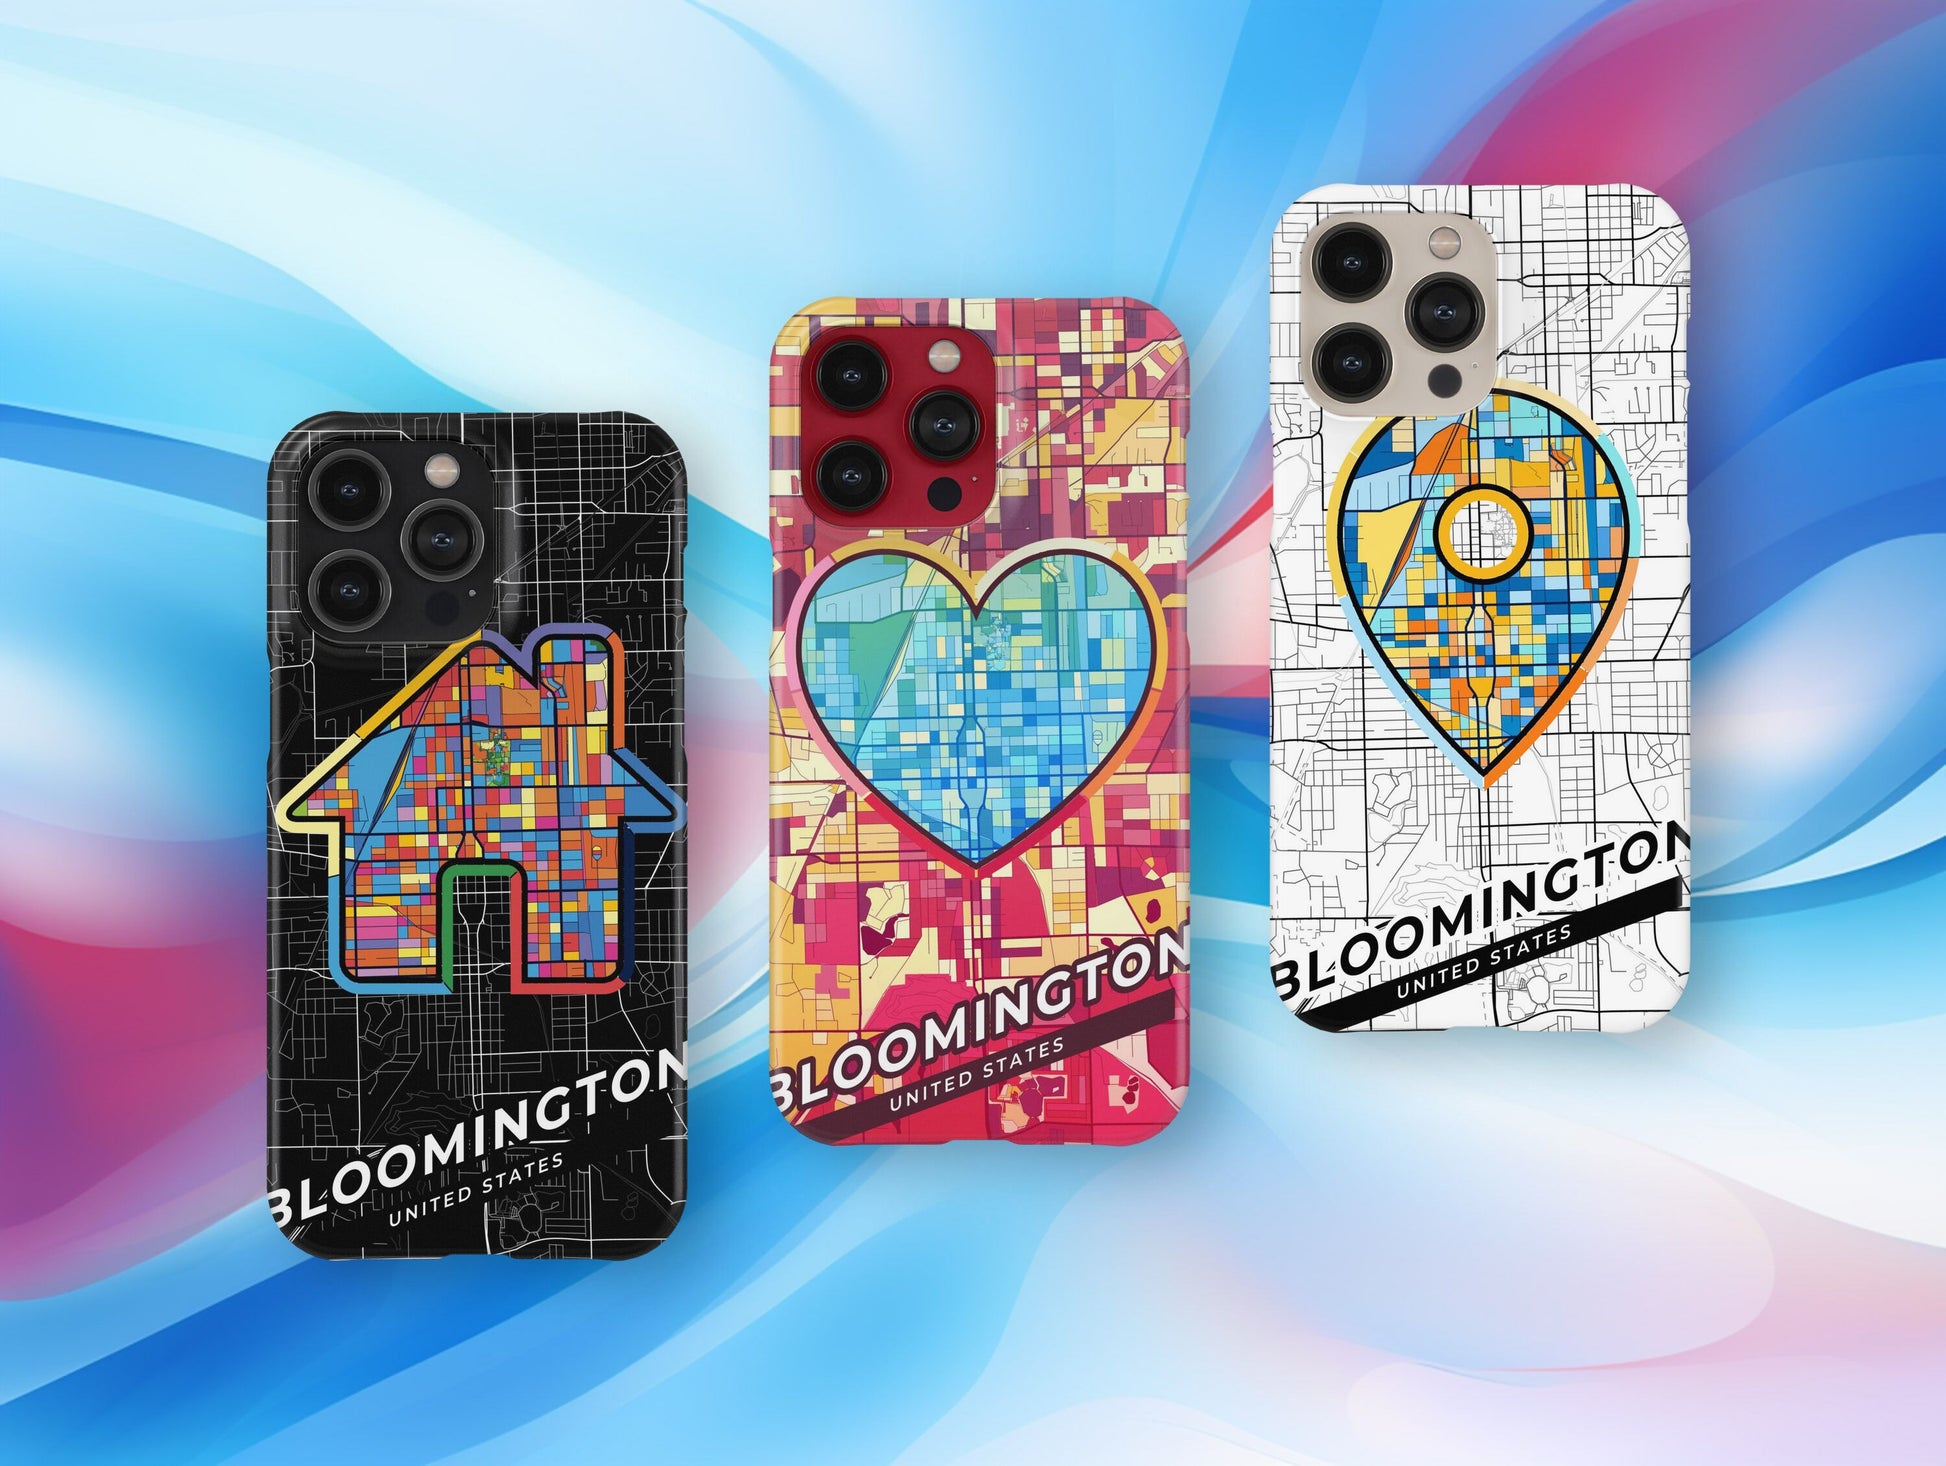 Bloomington Illinois slim phone case with colorful icon. Birthday, wedding or housewarming gift. Couple match cases.